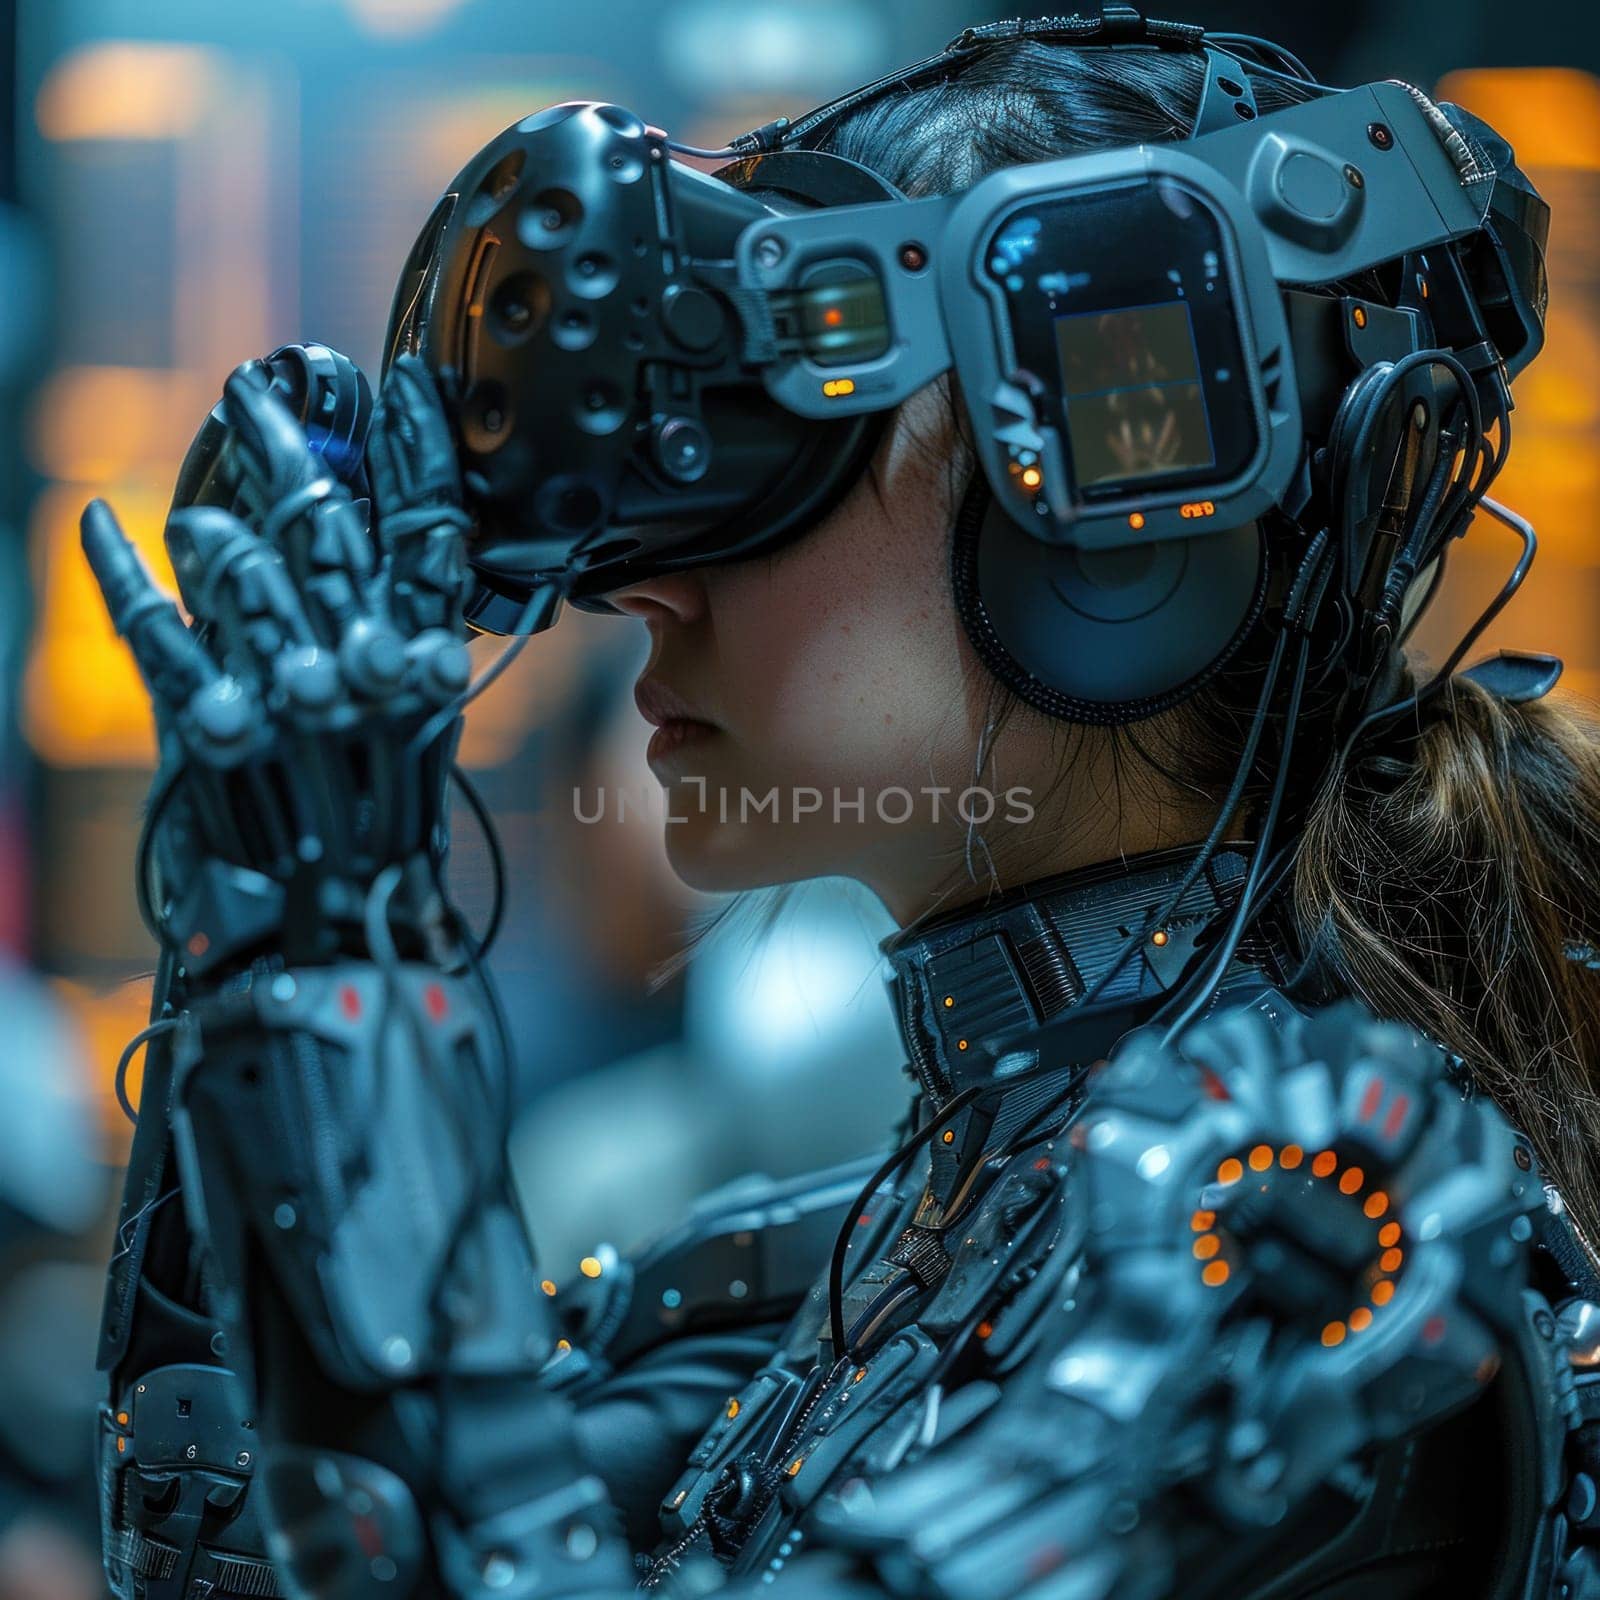 A woman wearing a robot suit is listening to music using headphones in a futuristic setting.